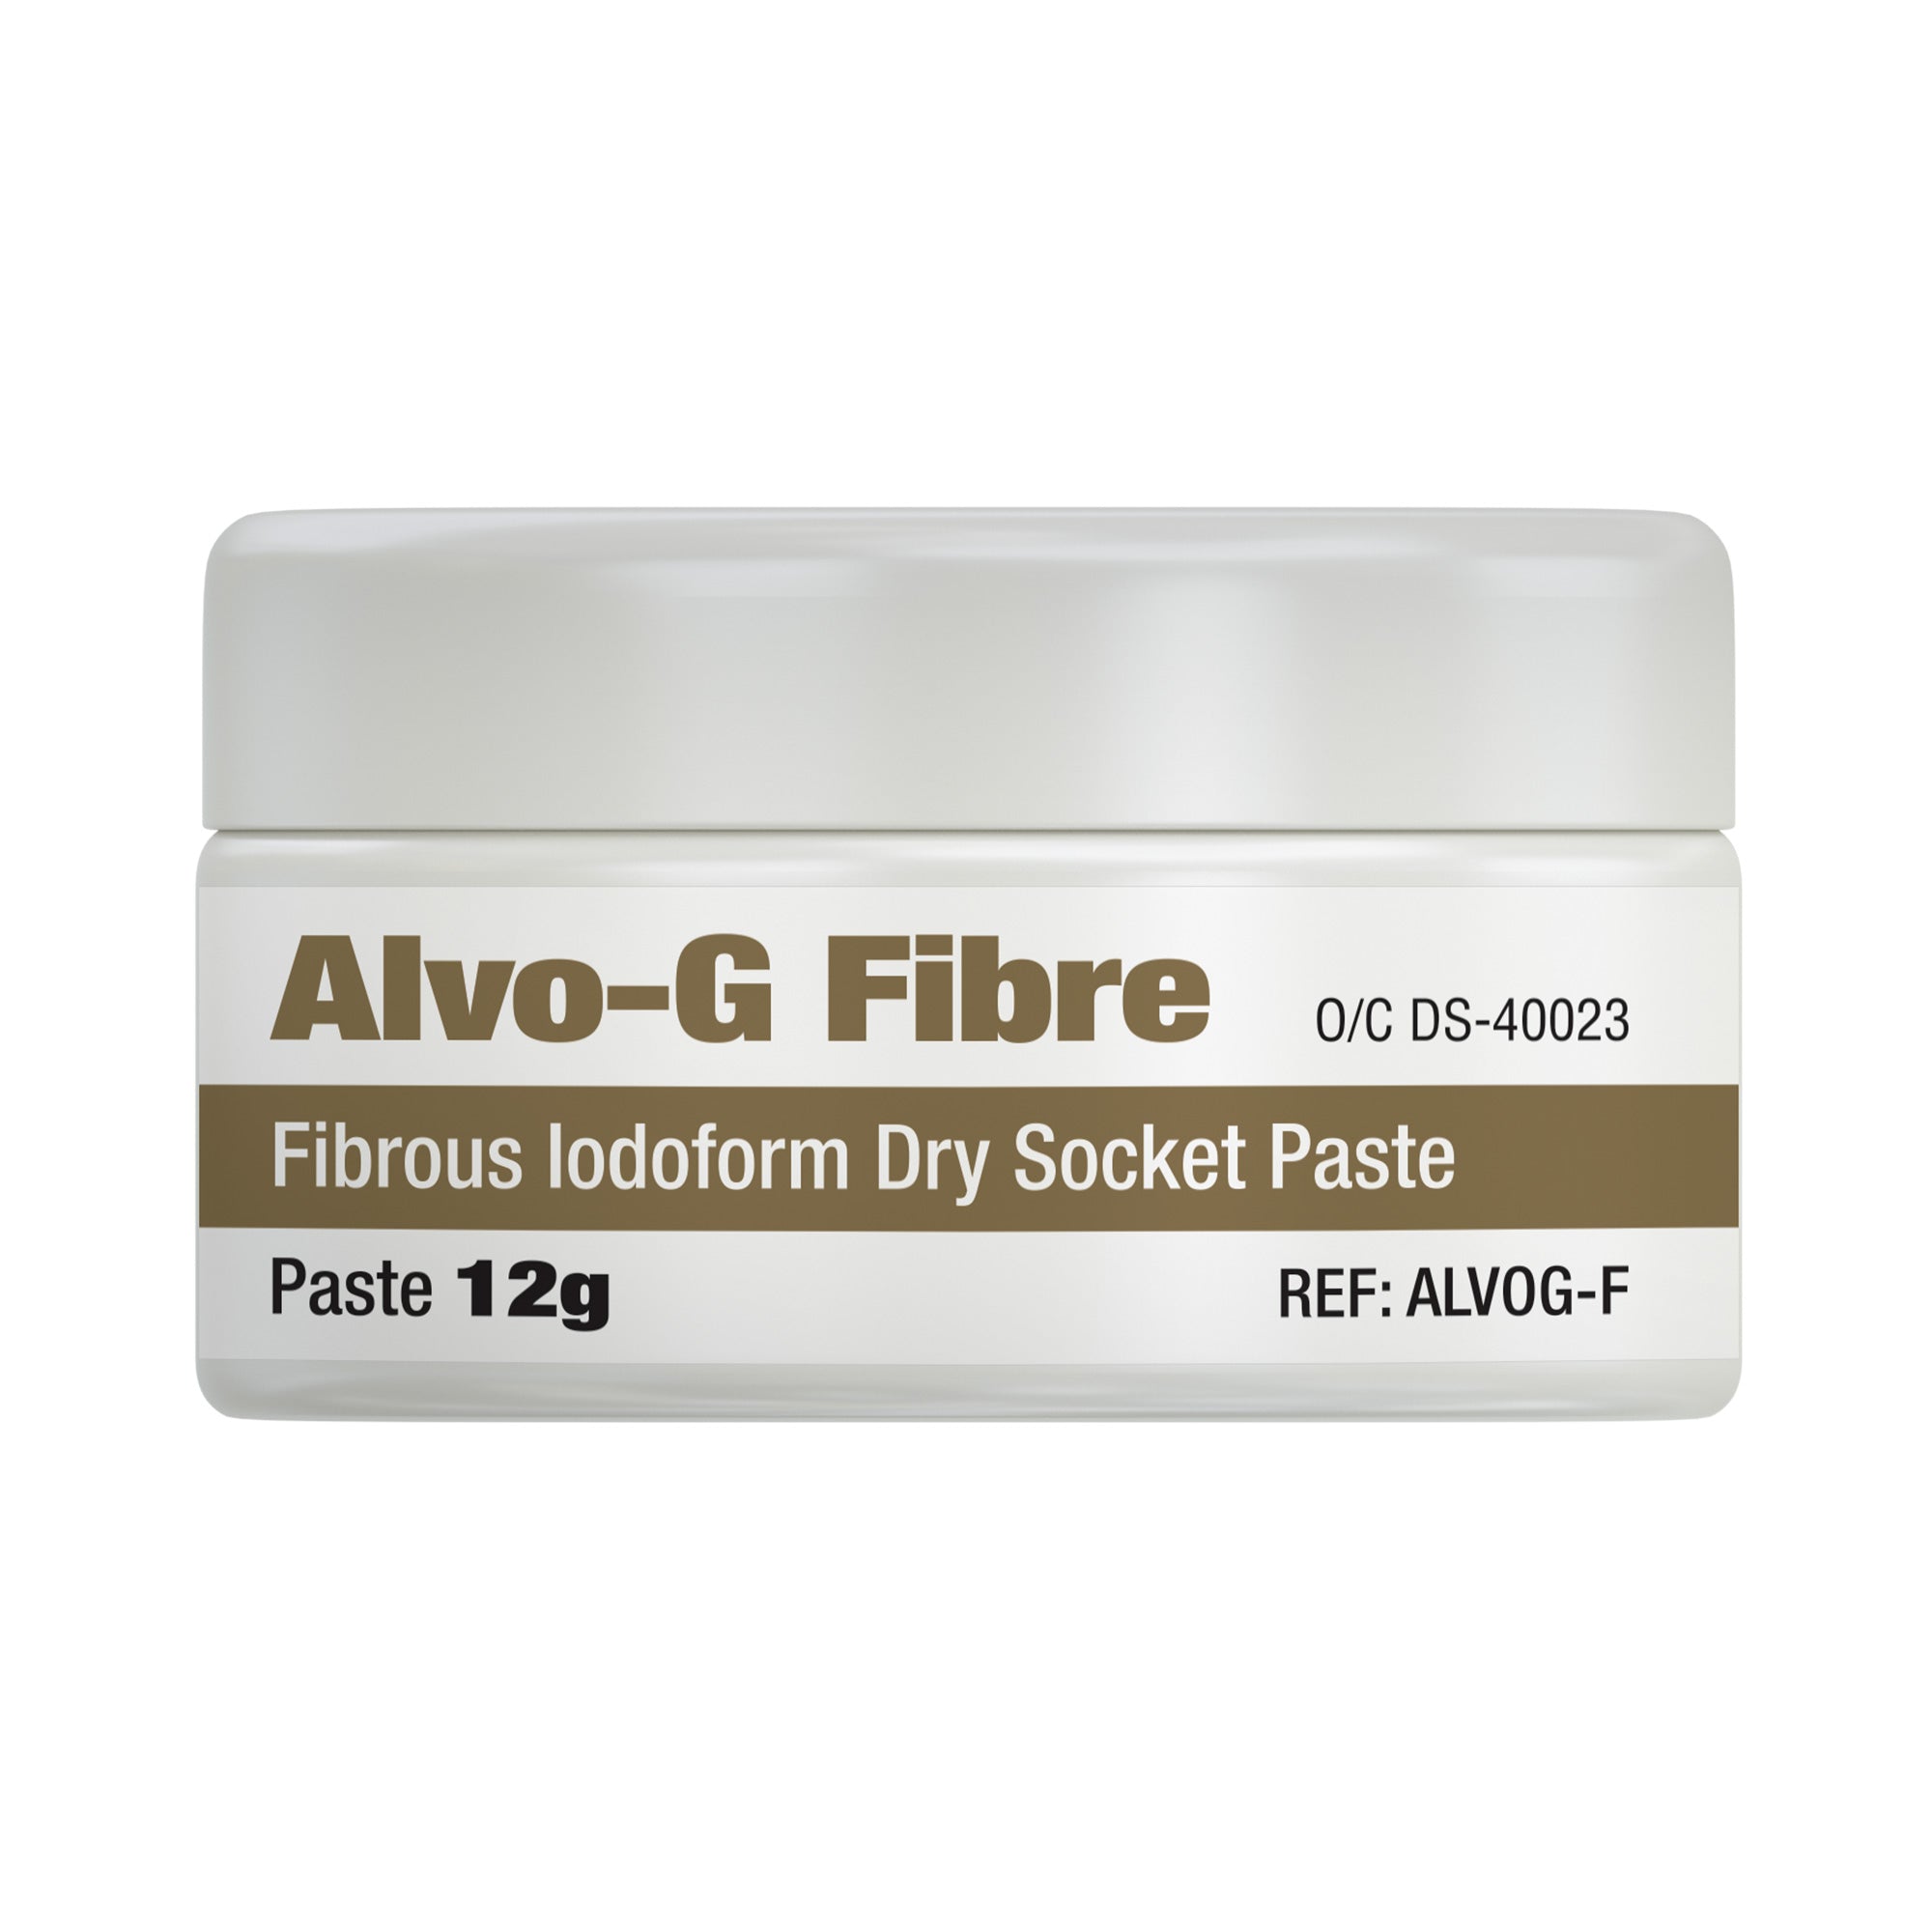 DSI Alvo-G Fibre For Dry Socket and Post-Extraction Dressing